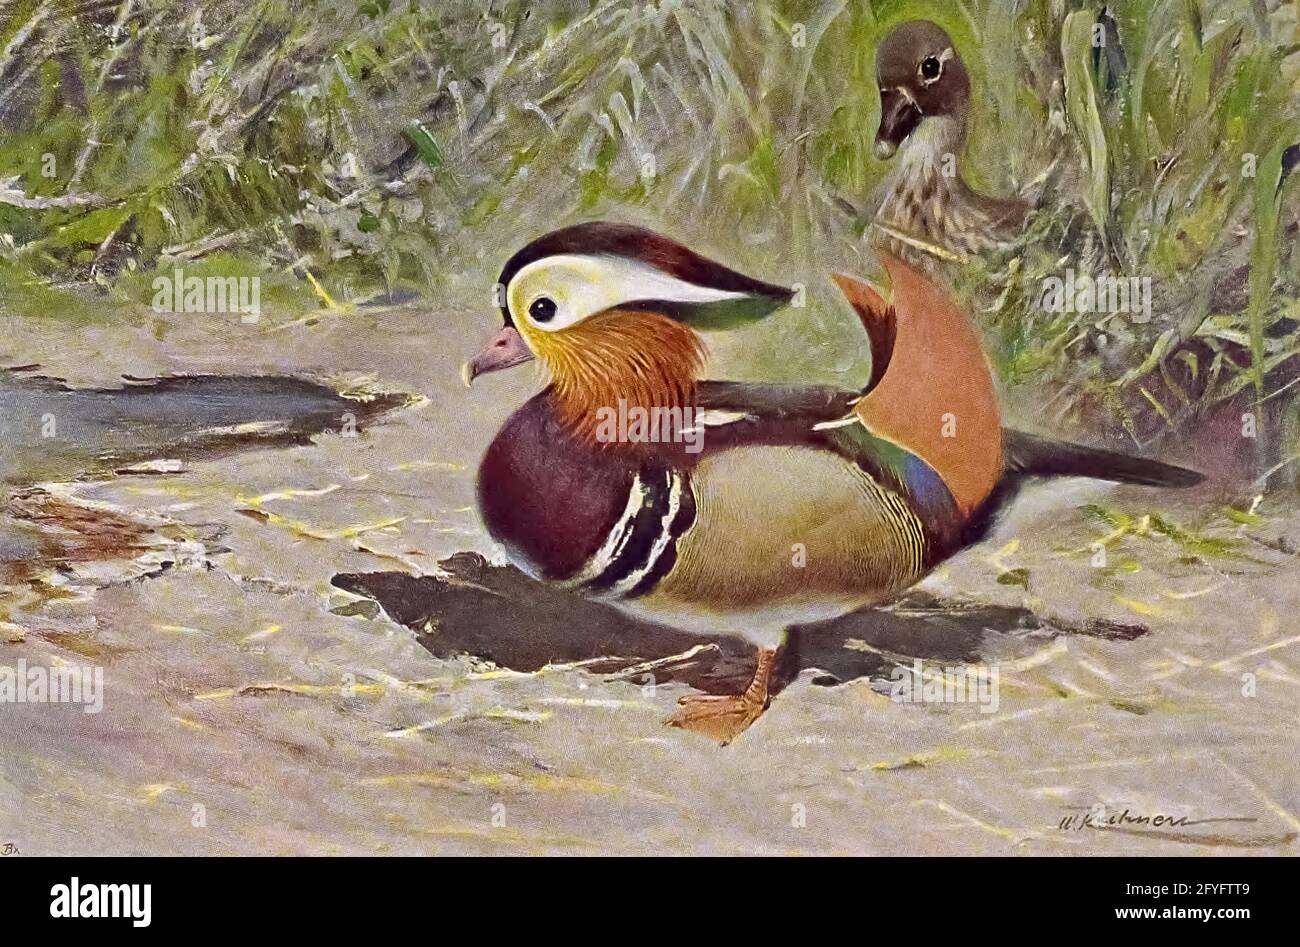 The mandarin duck (Aix galericulata here as Aix galerita) is a perching duck species native to the East Palearctic. It is medium-sized, at 41–49 cm (16–19 in) long with a 65–75 cm (26–30 in) wingspan. from the book '  Animal portraiture ' by Richard Lydekker, and illustrated by Wilhelm Kuhnert, Published in London by Frederick Warne & Co. in 1912 Stock Photo